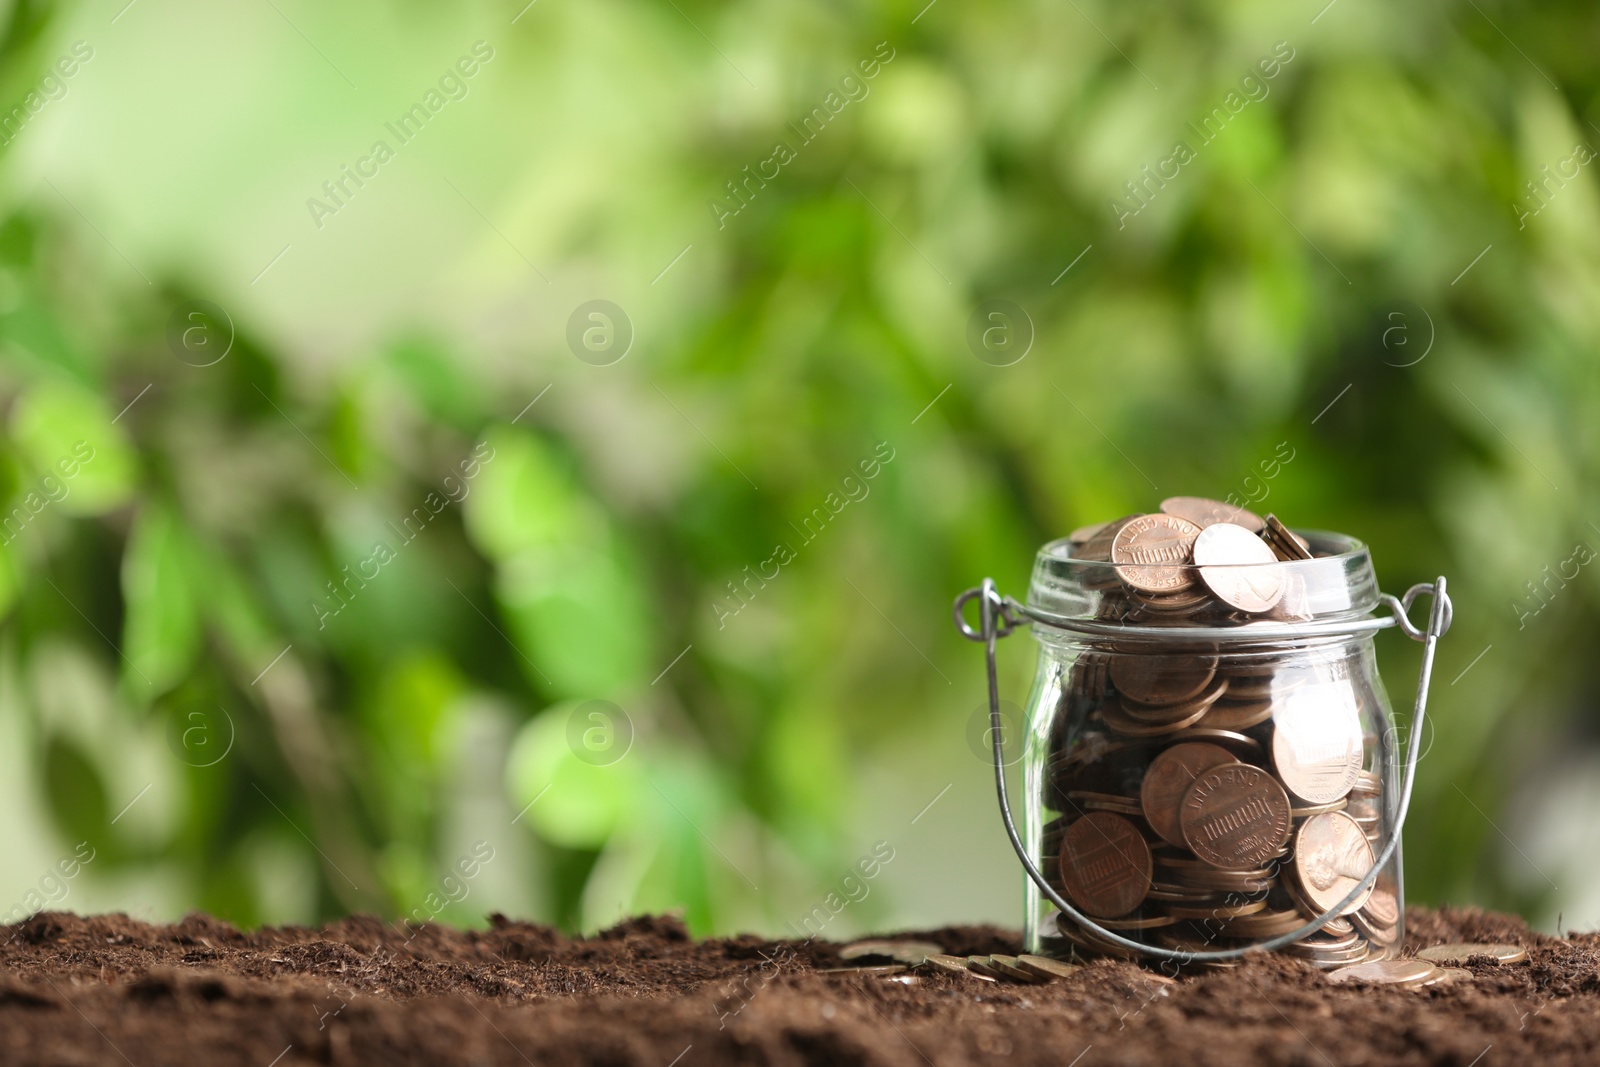 Photo of Coins on soil against blurred background, space for text. Money savings